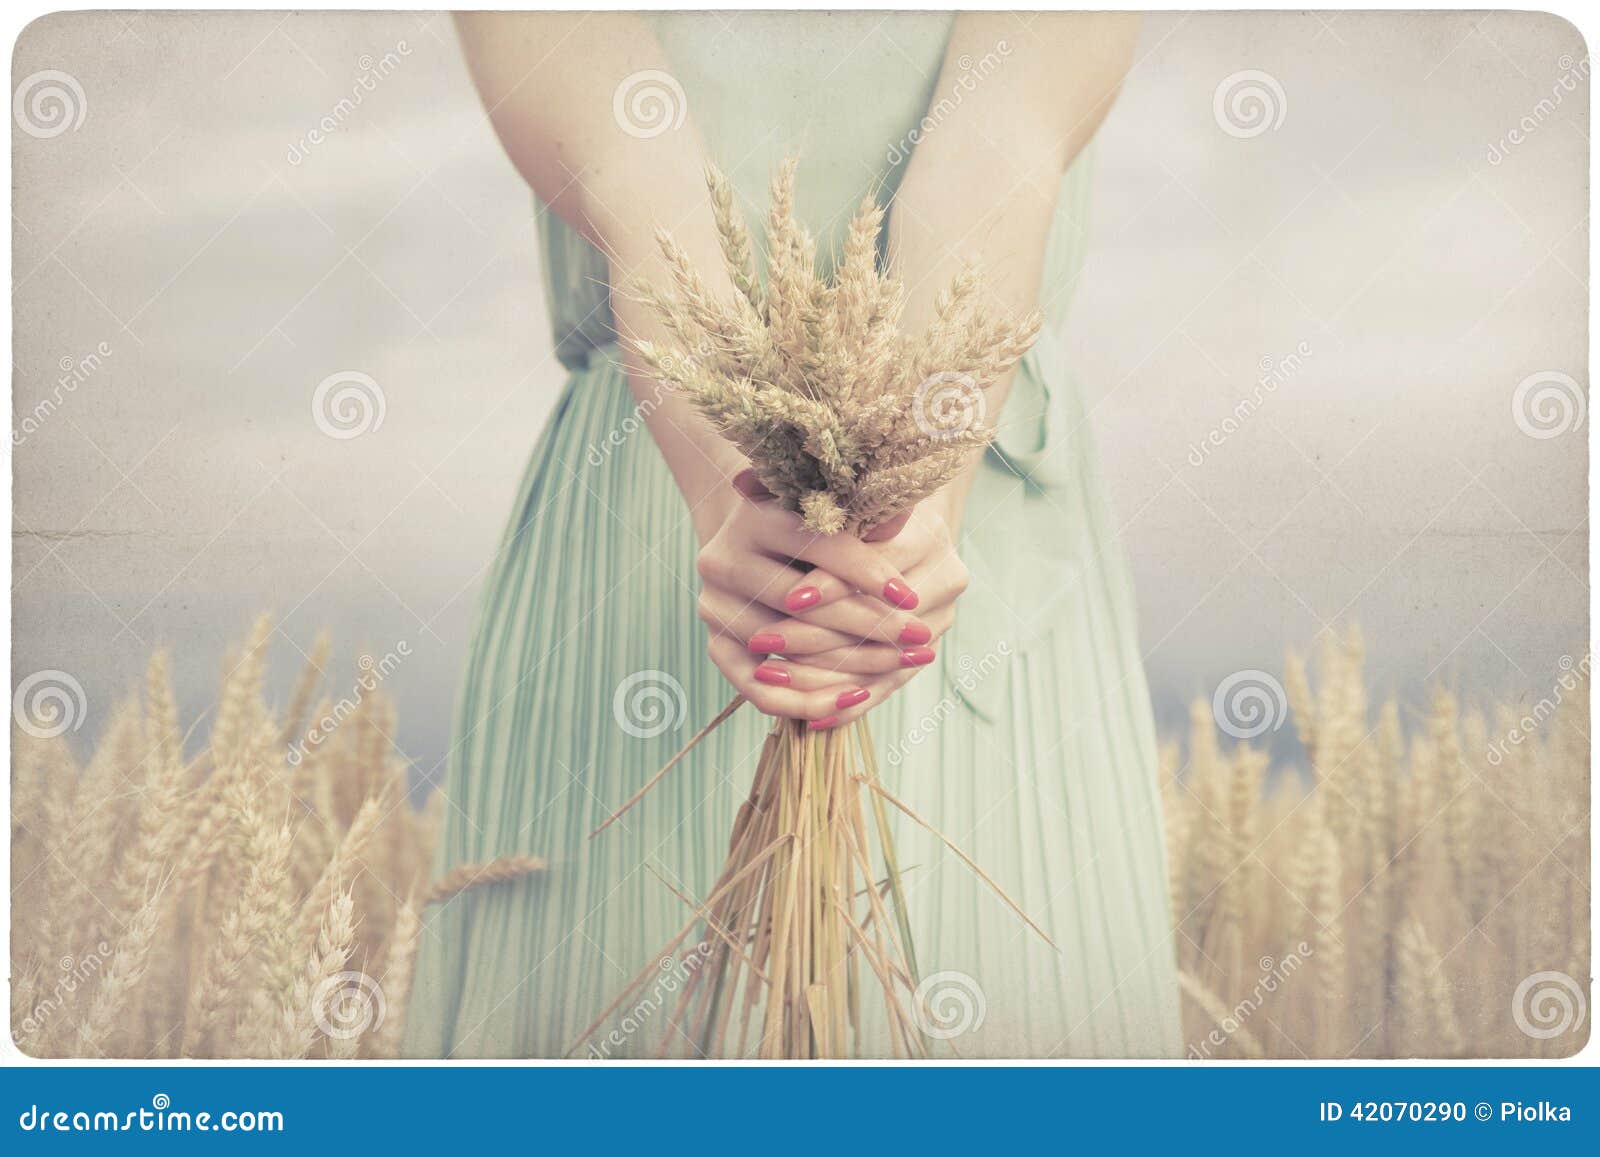 woman holding some corn spikes